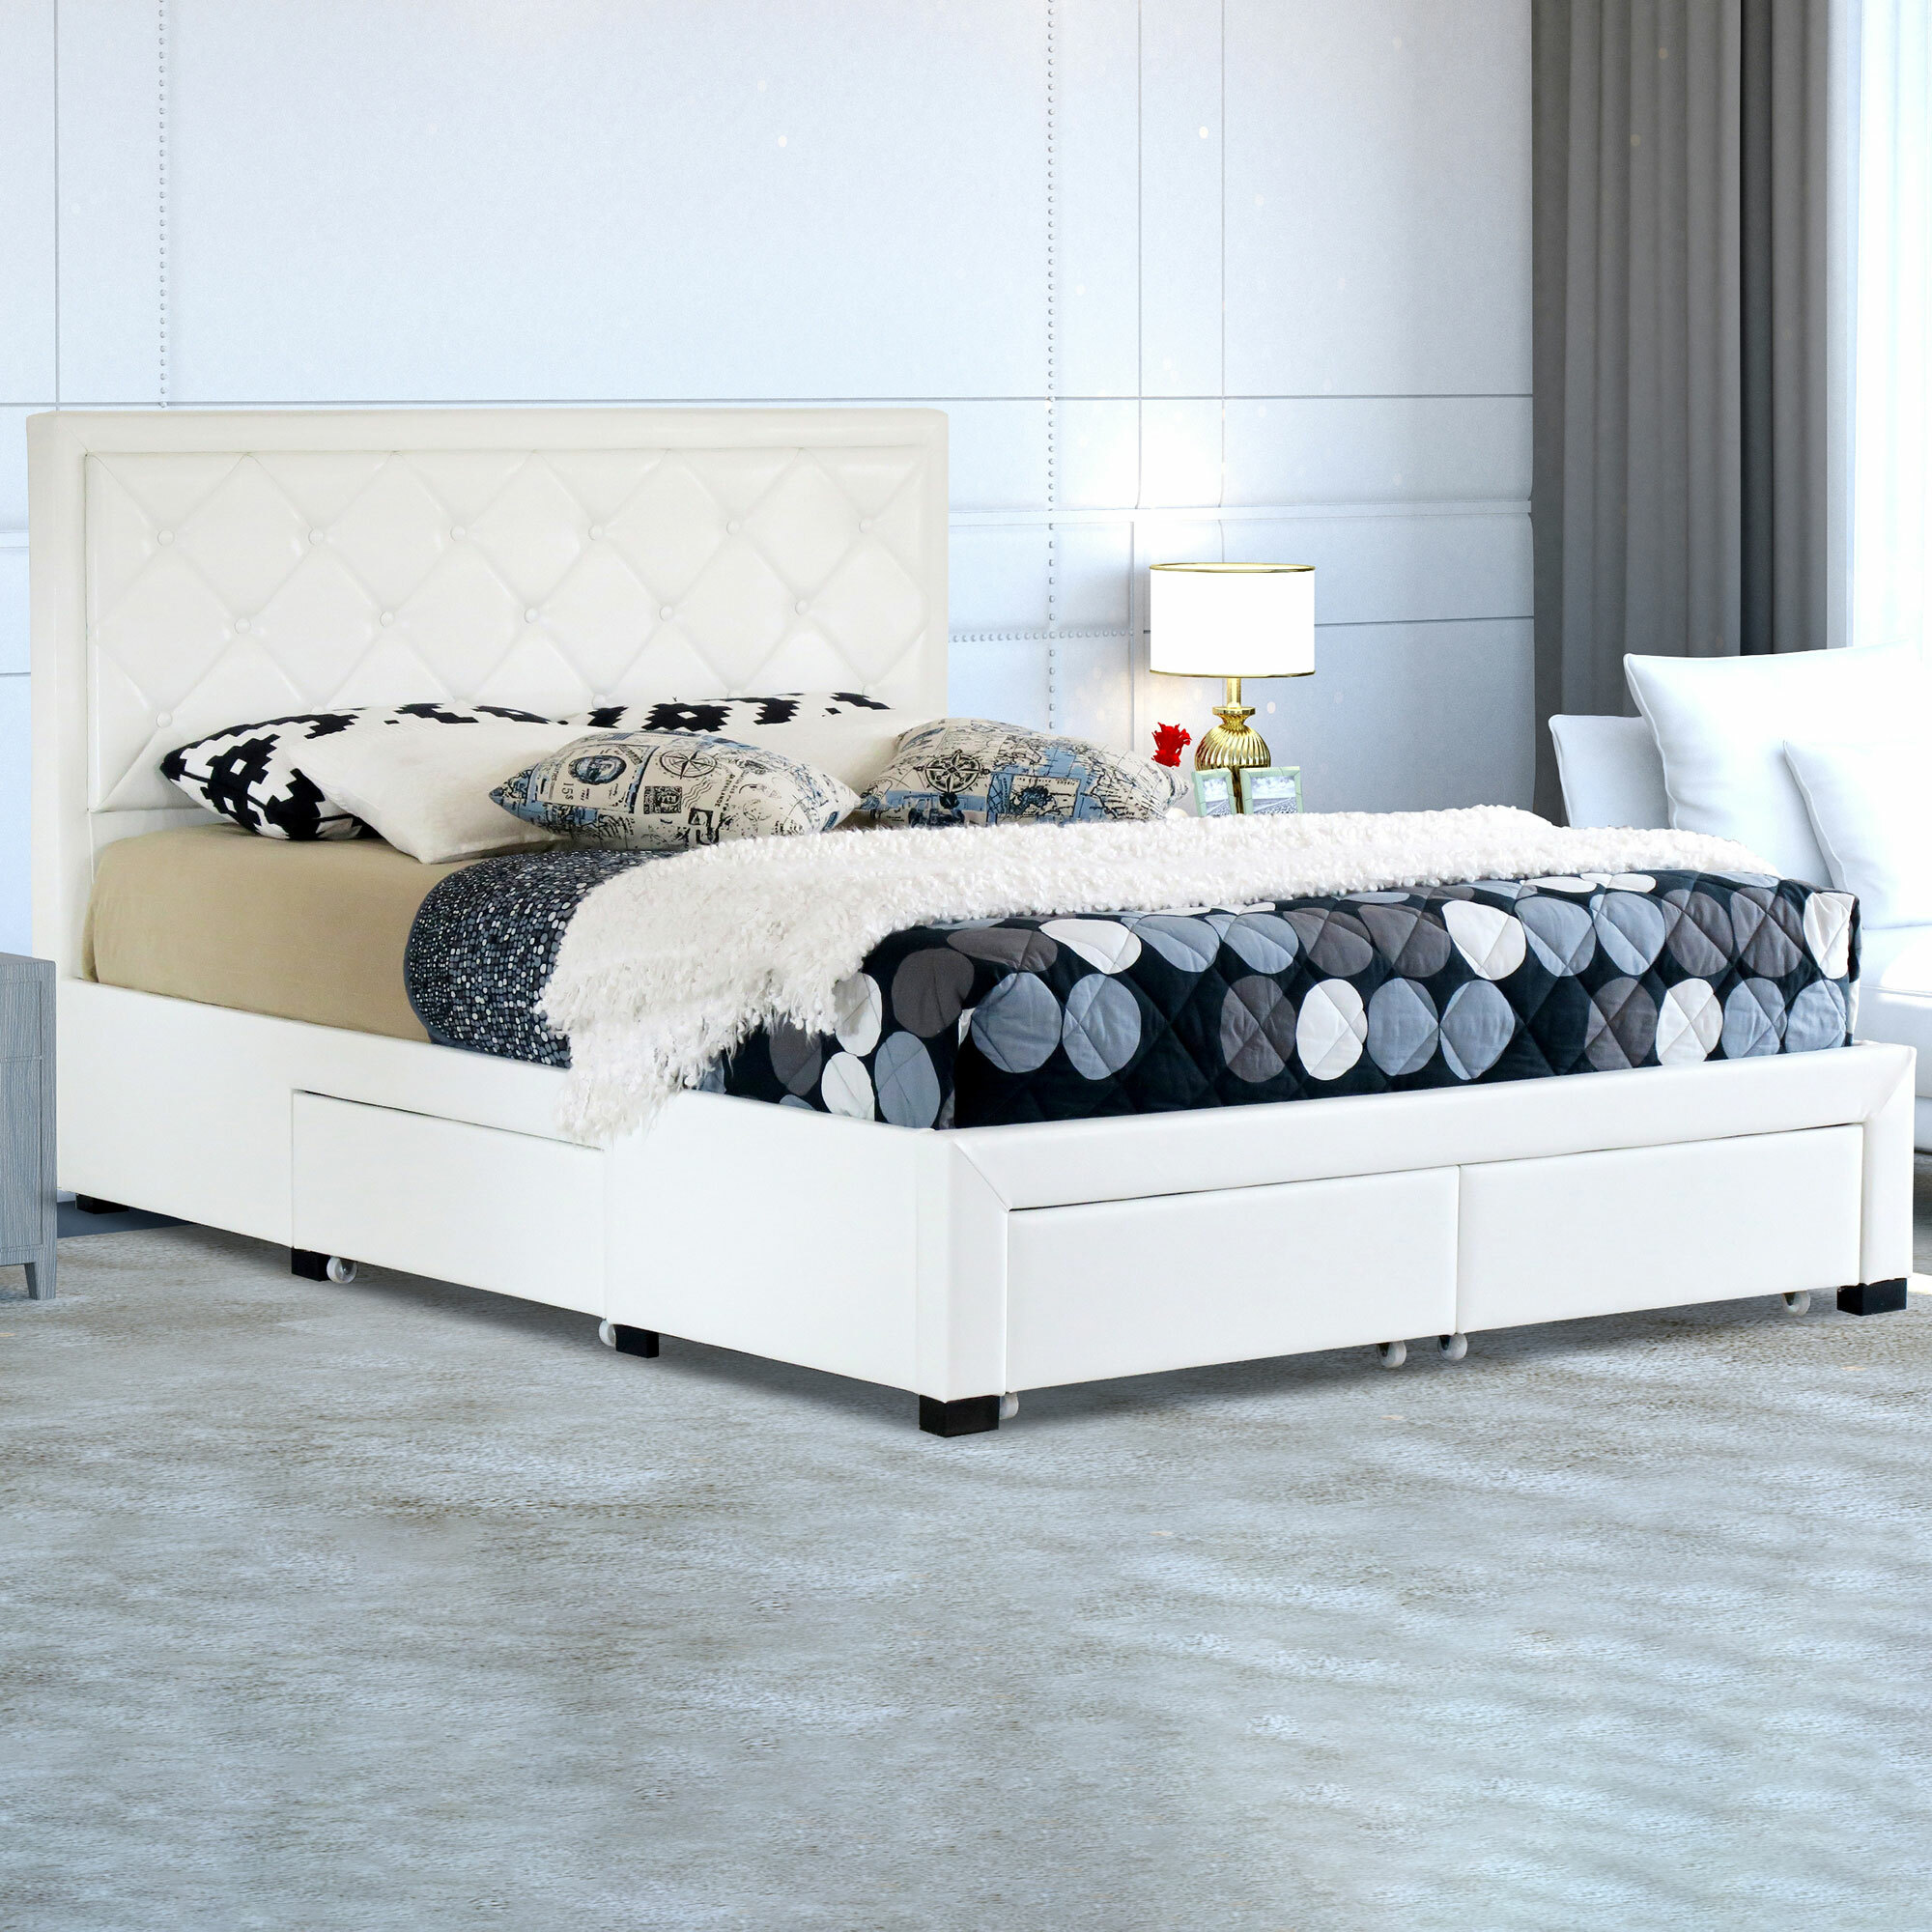 Faux Leather Bed Frame With Storage, Leather Bed Frame With Drawers